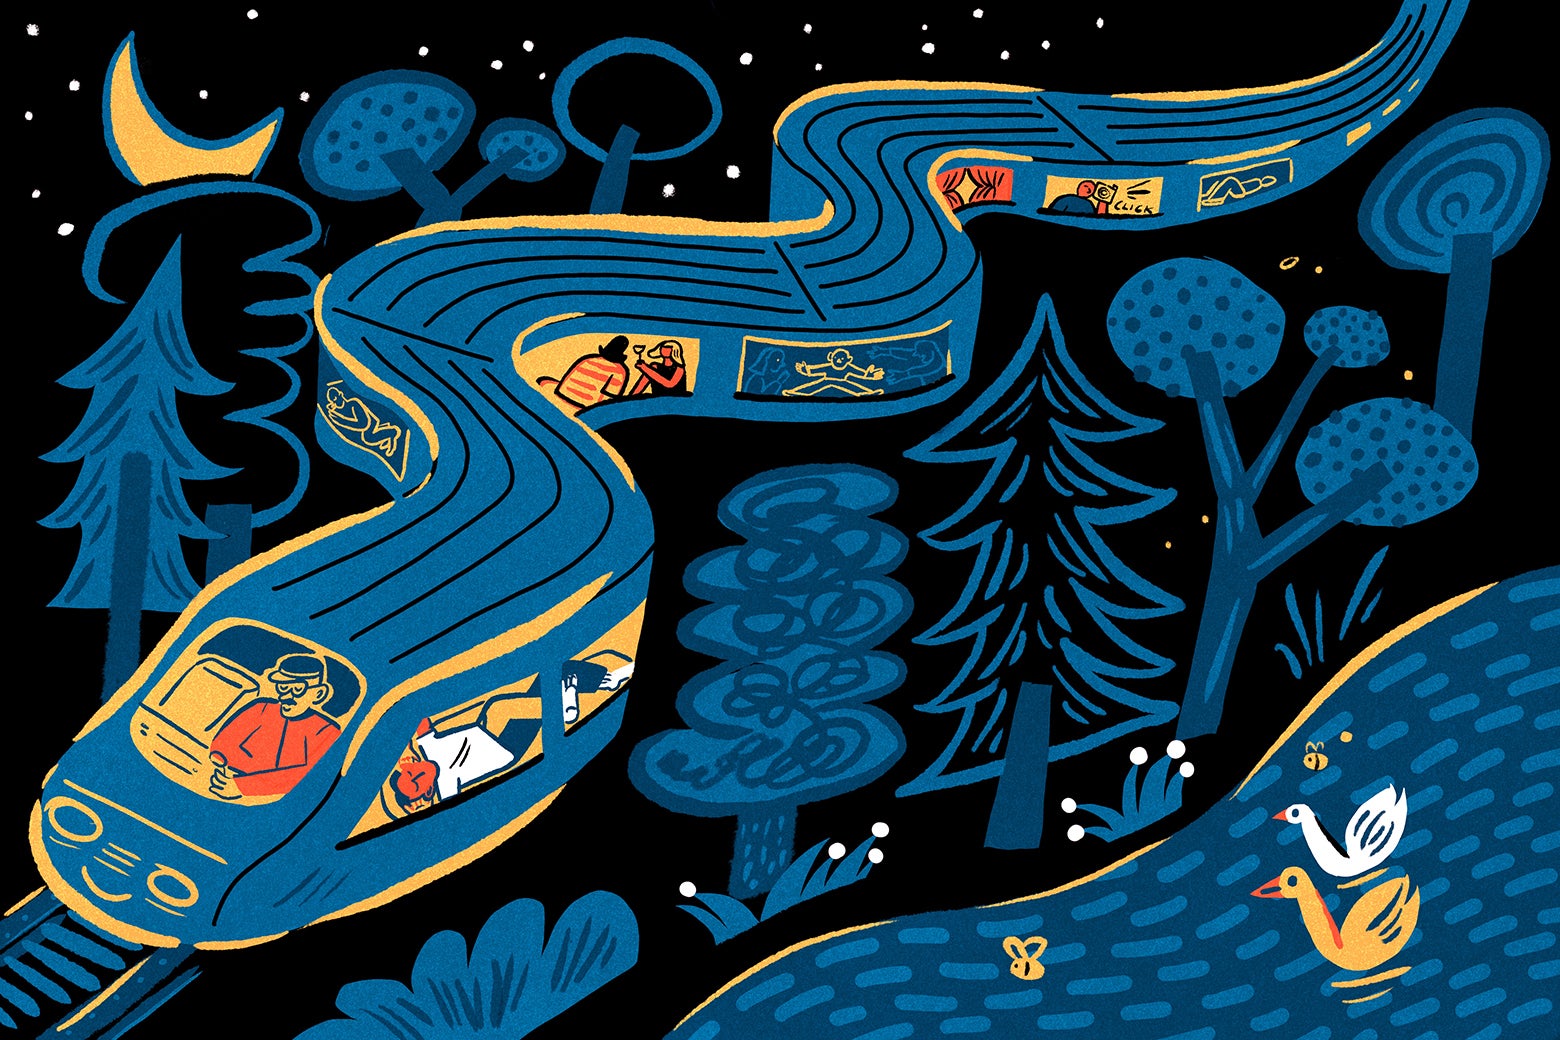 A train snakes through a blue-and-black nighttime landscape of forests and a lake with ducks.